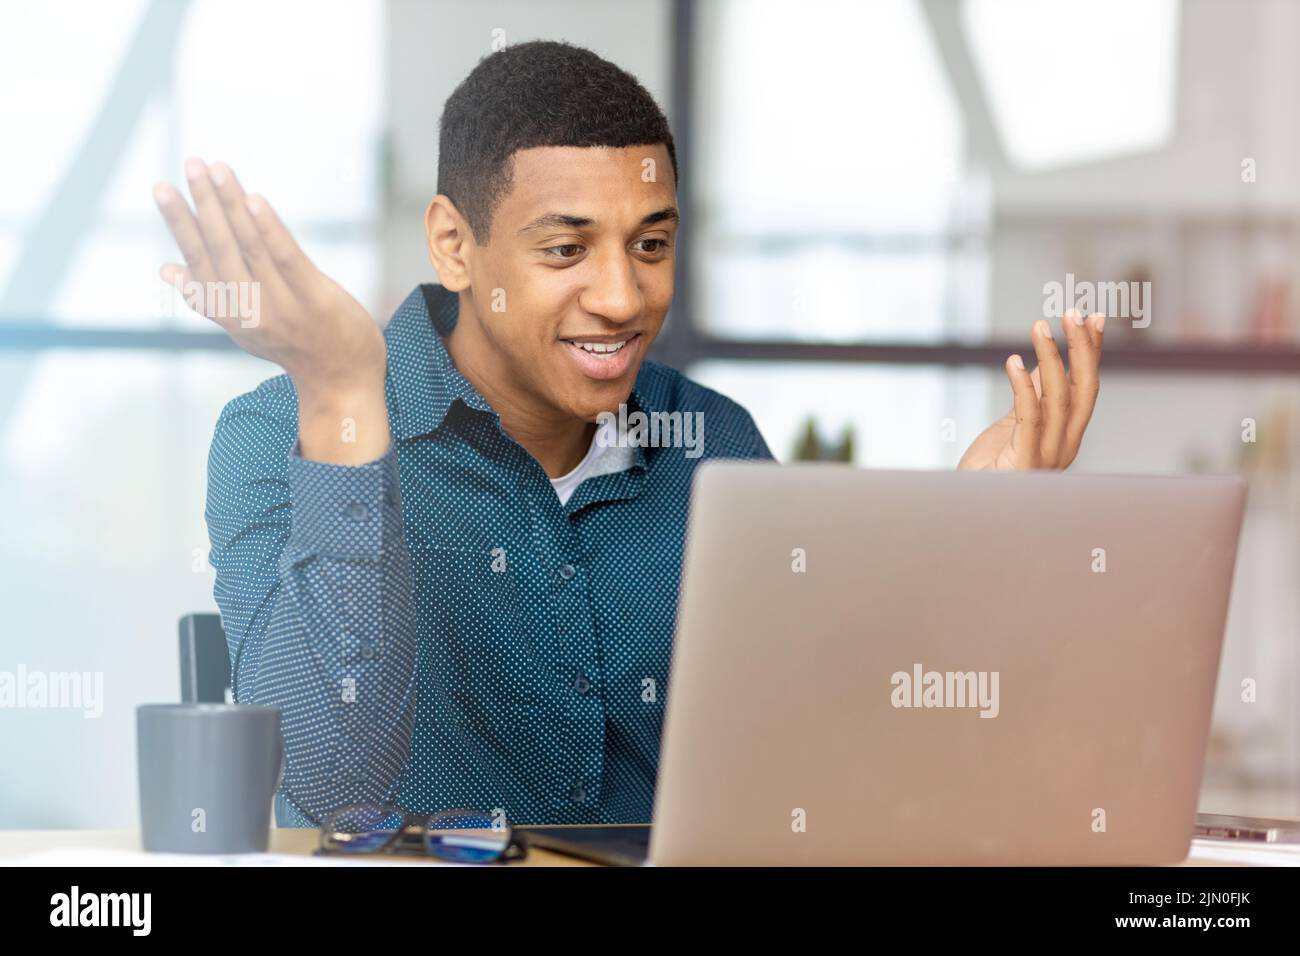 Man working using laptop Young businessman talking with colleagues or partners on video call Stock Photo